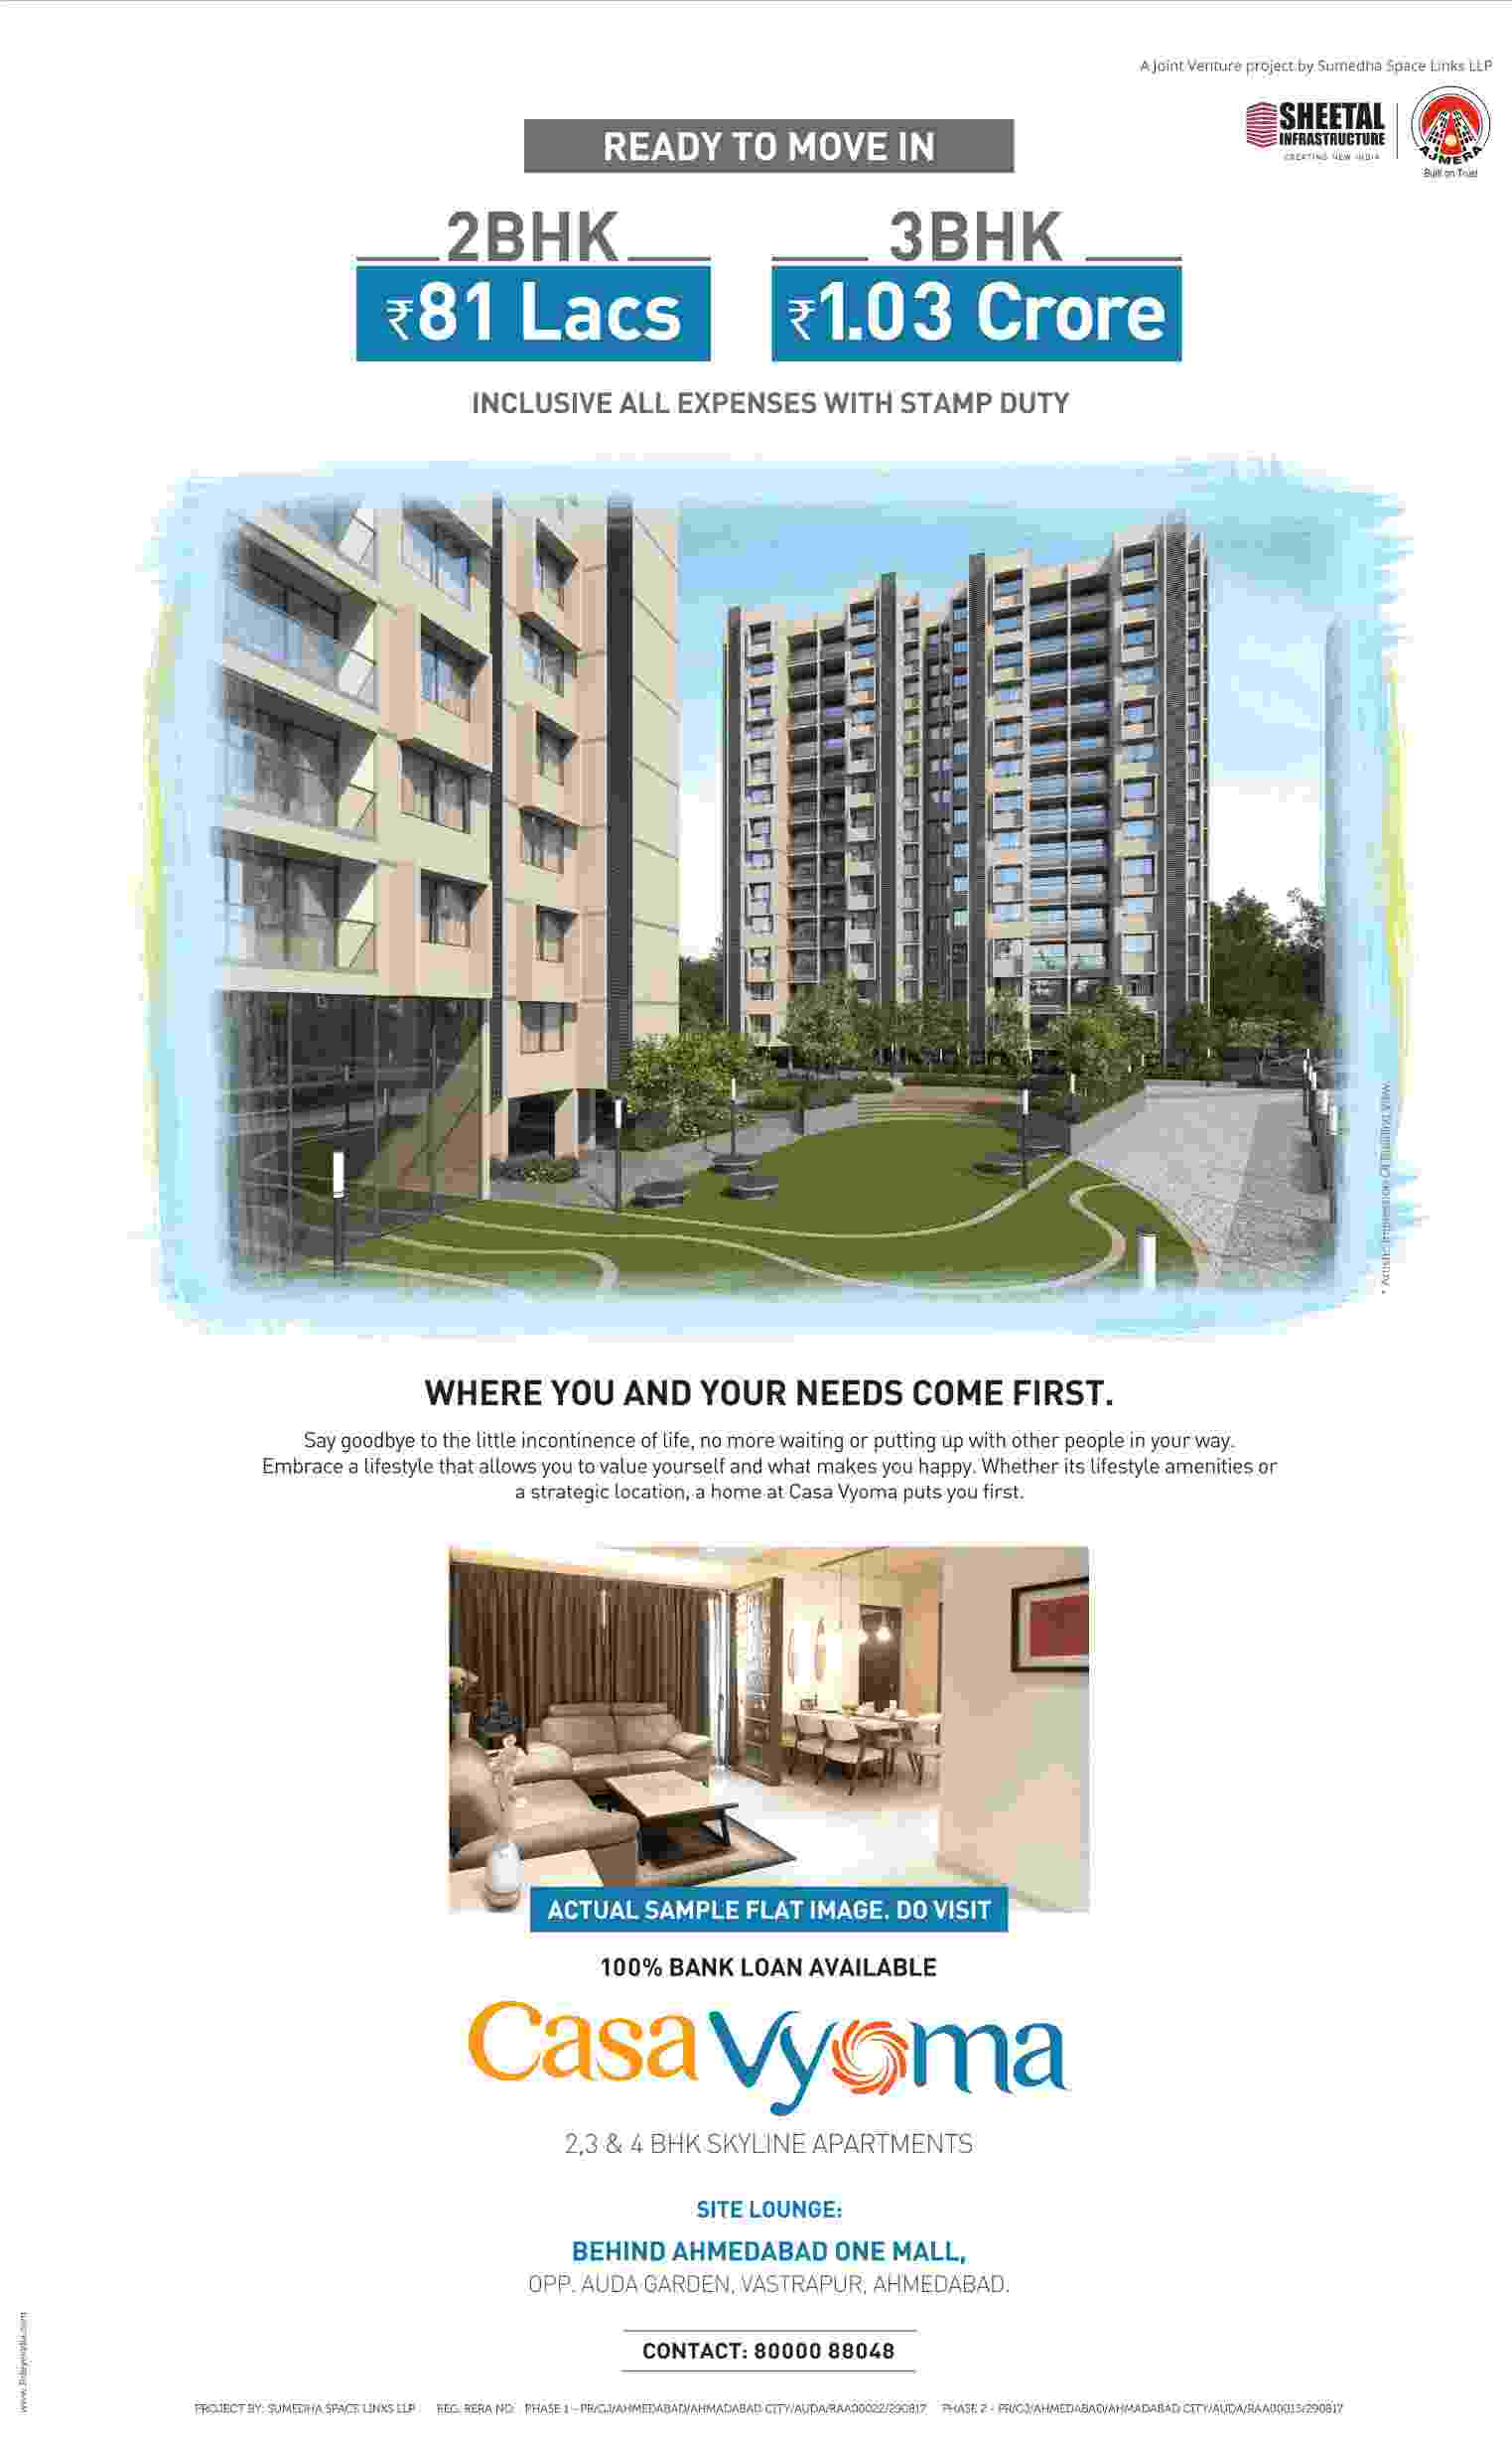 Live in ready to move in homes at Sheetal Casa Vyoma in Ahmedabad Update